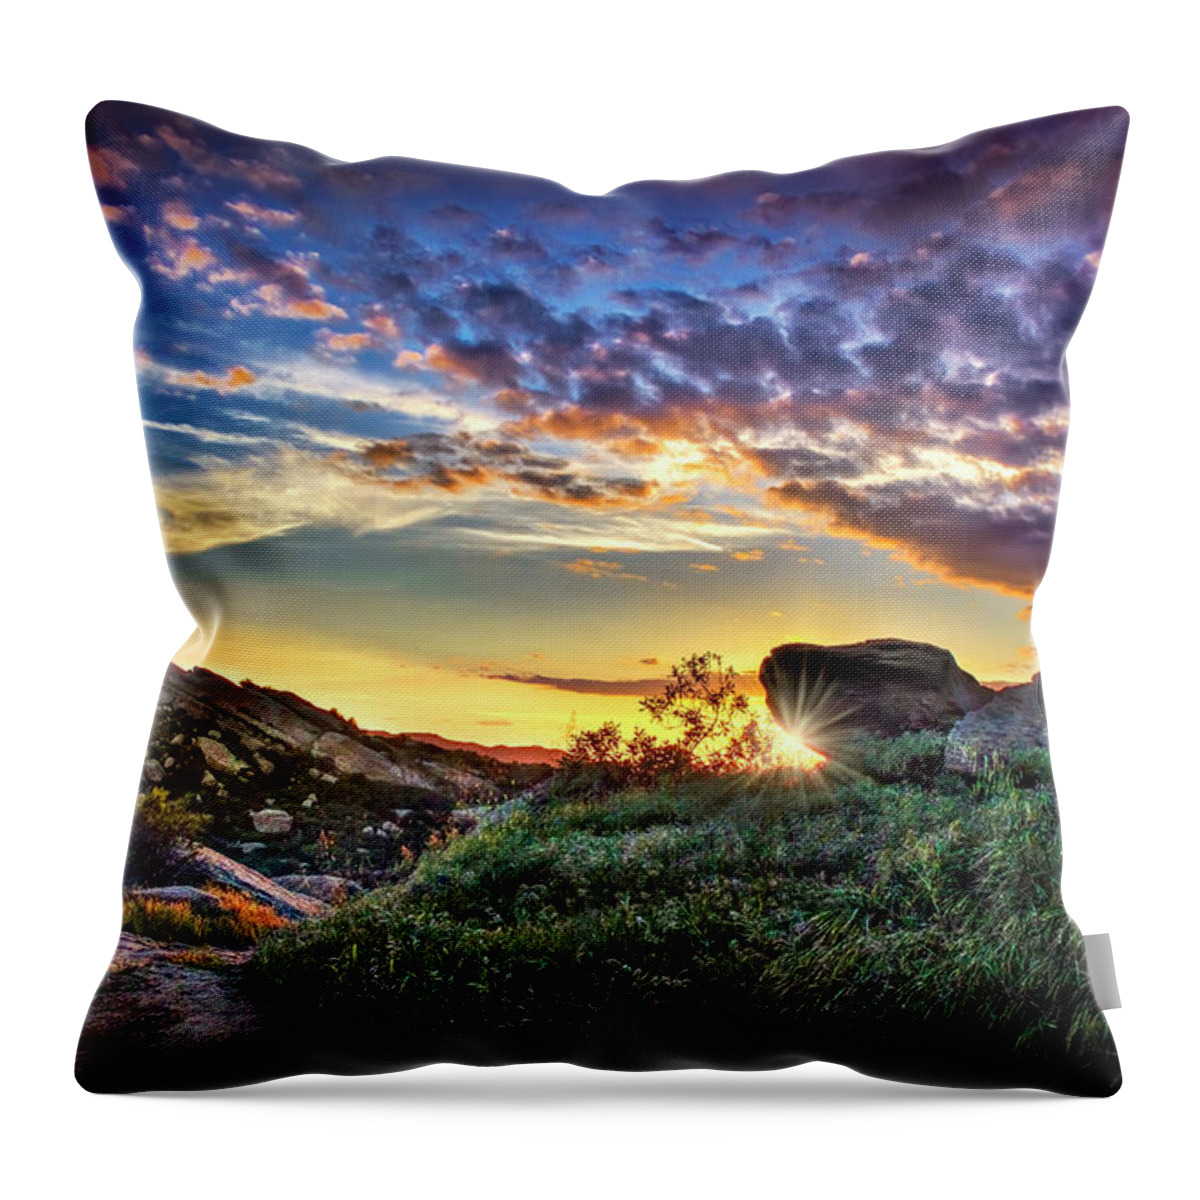 Sunset Throw Pillow featuring the photograph Sunset At Sage Ranch by Endre Balogh